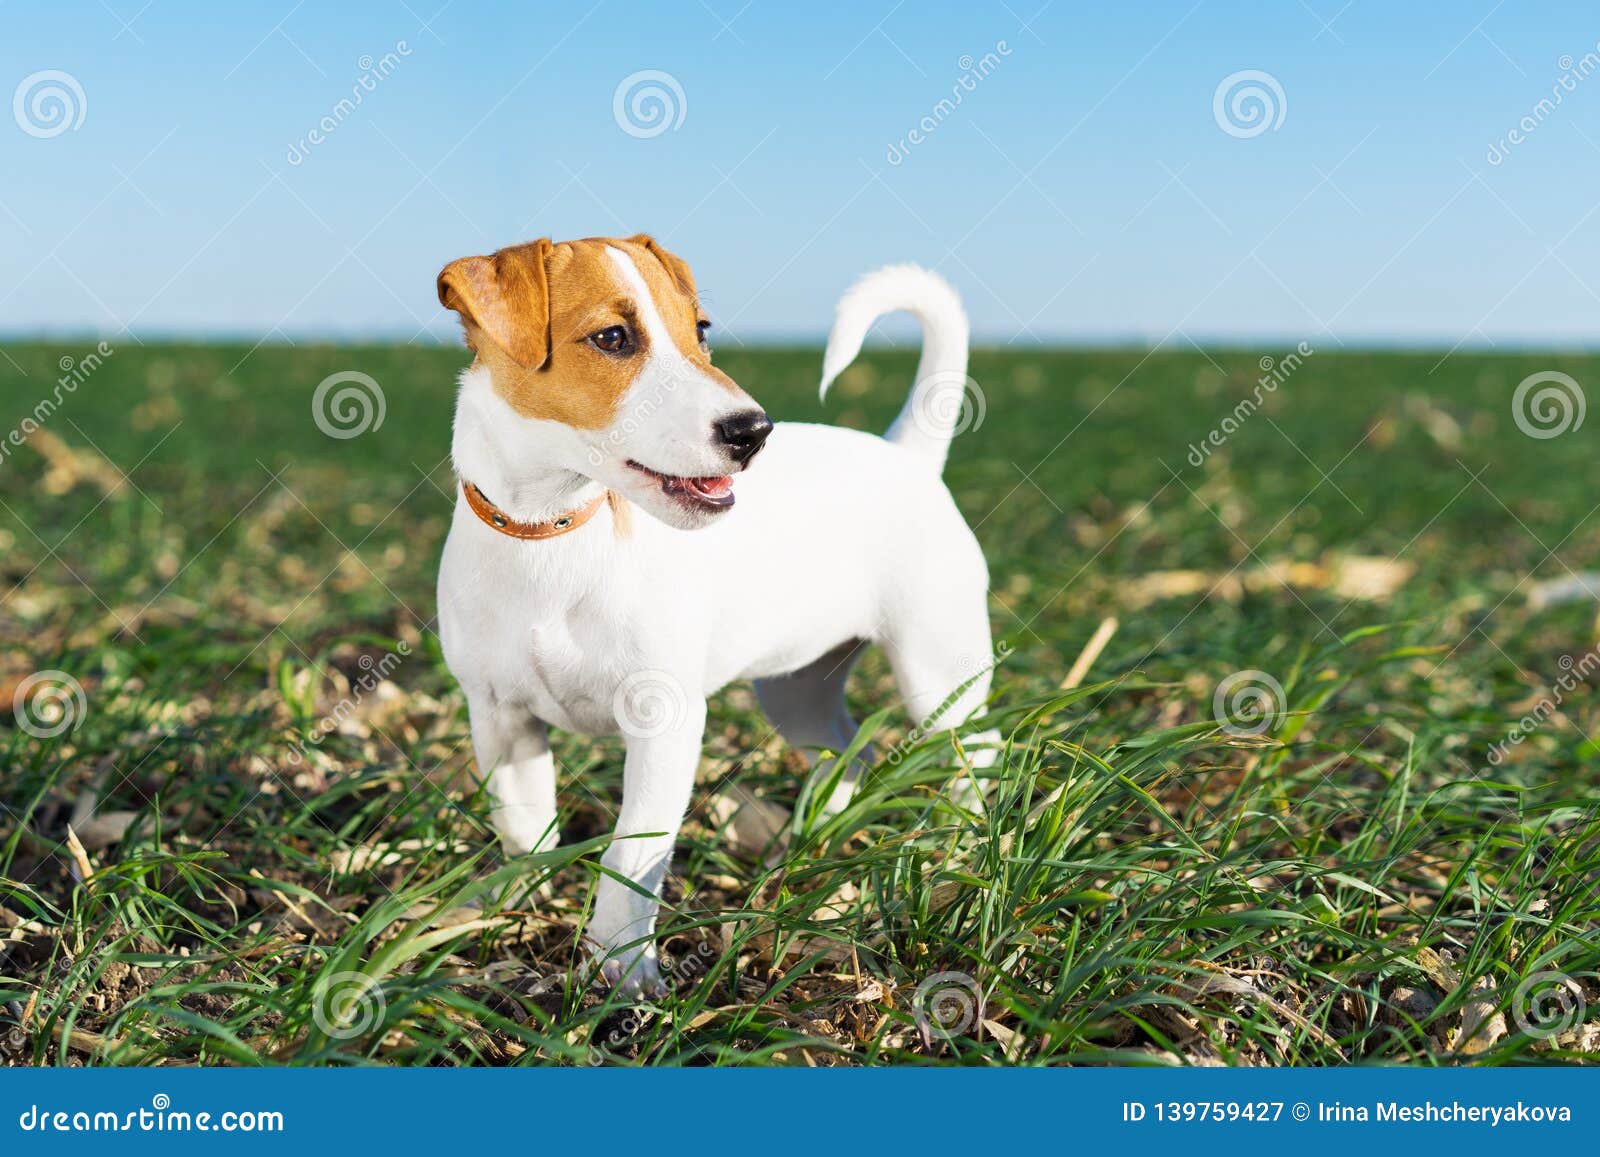 cute dog terrier jack russell playful on a walk in the summer in the meadow